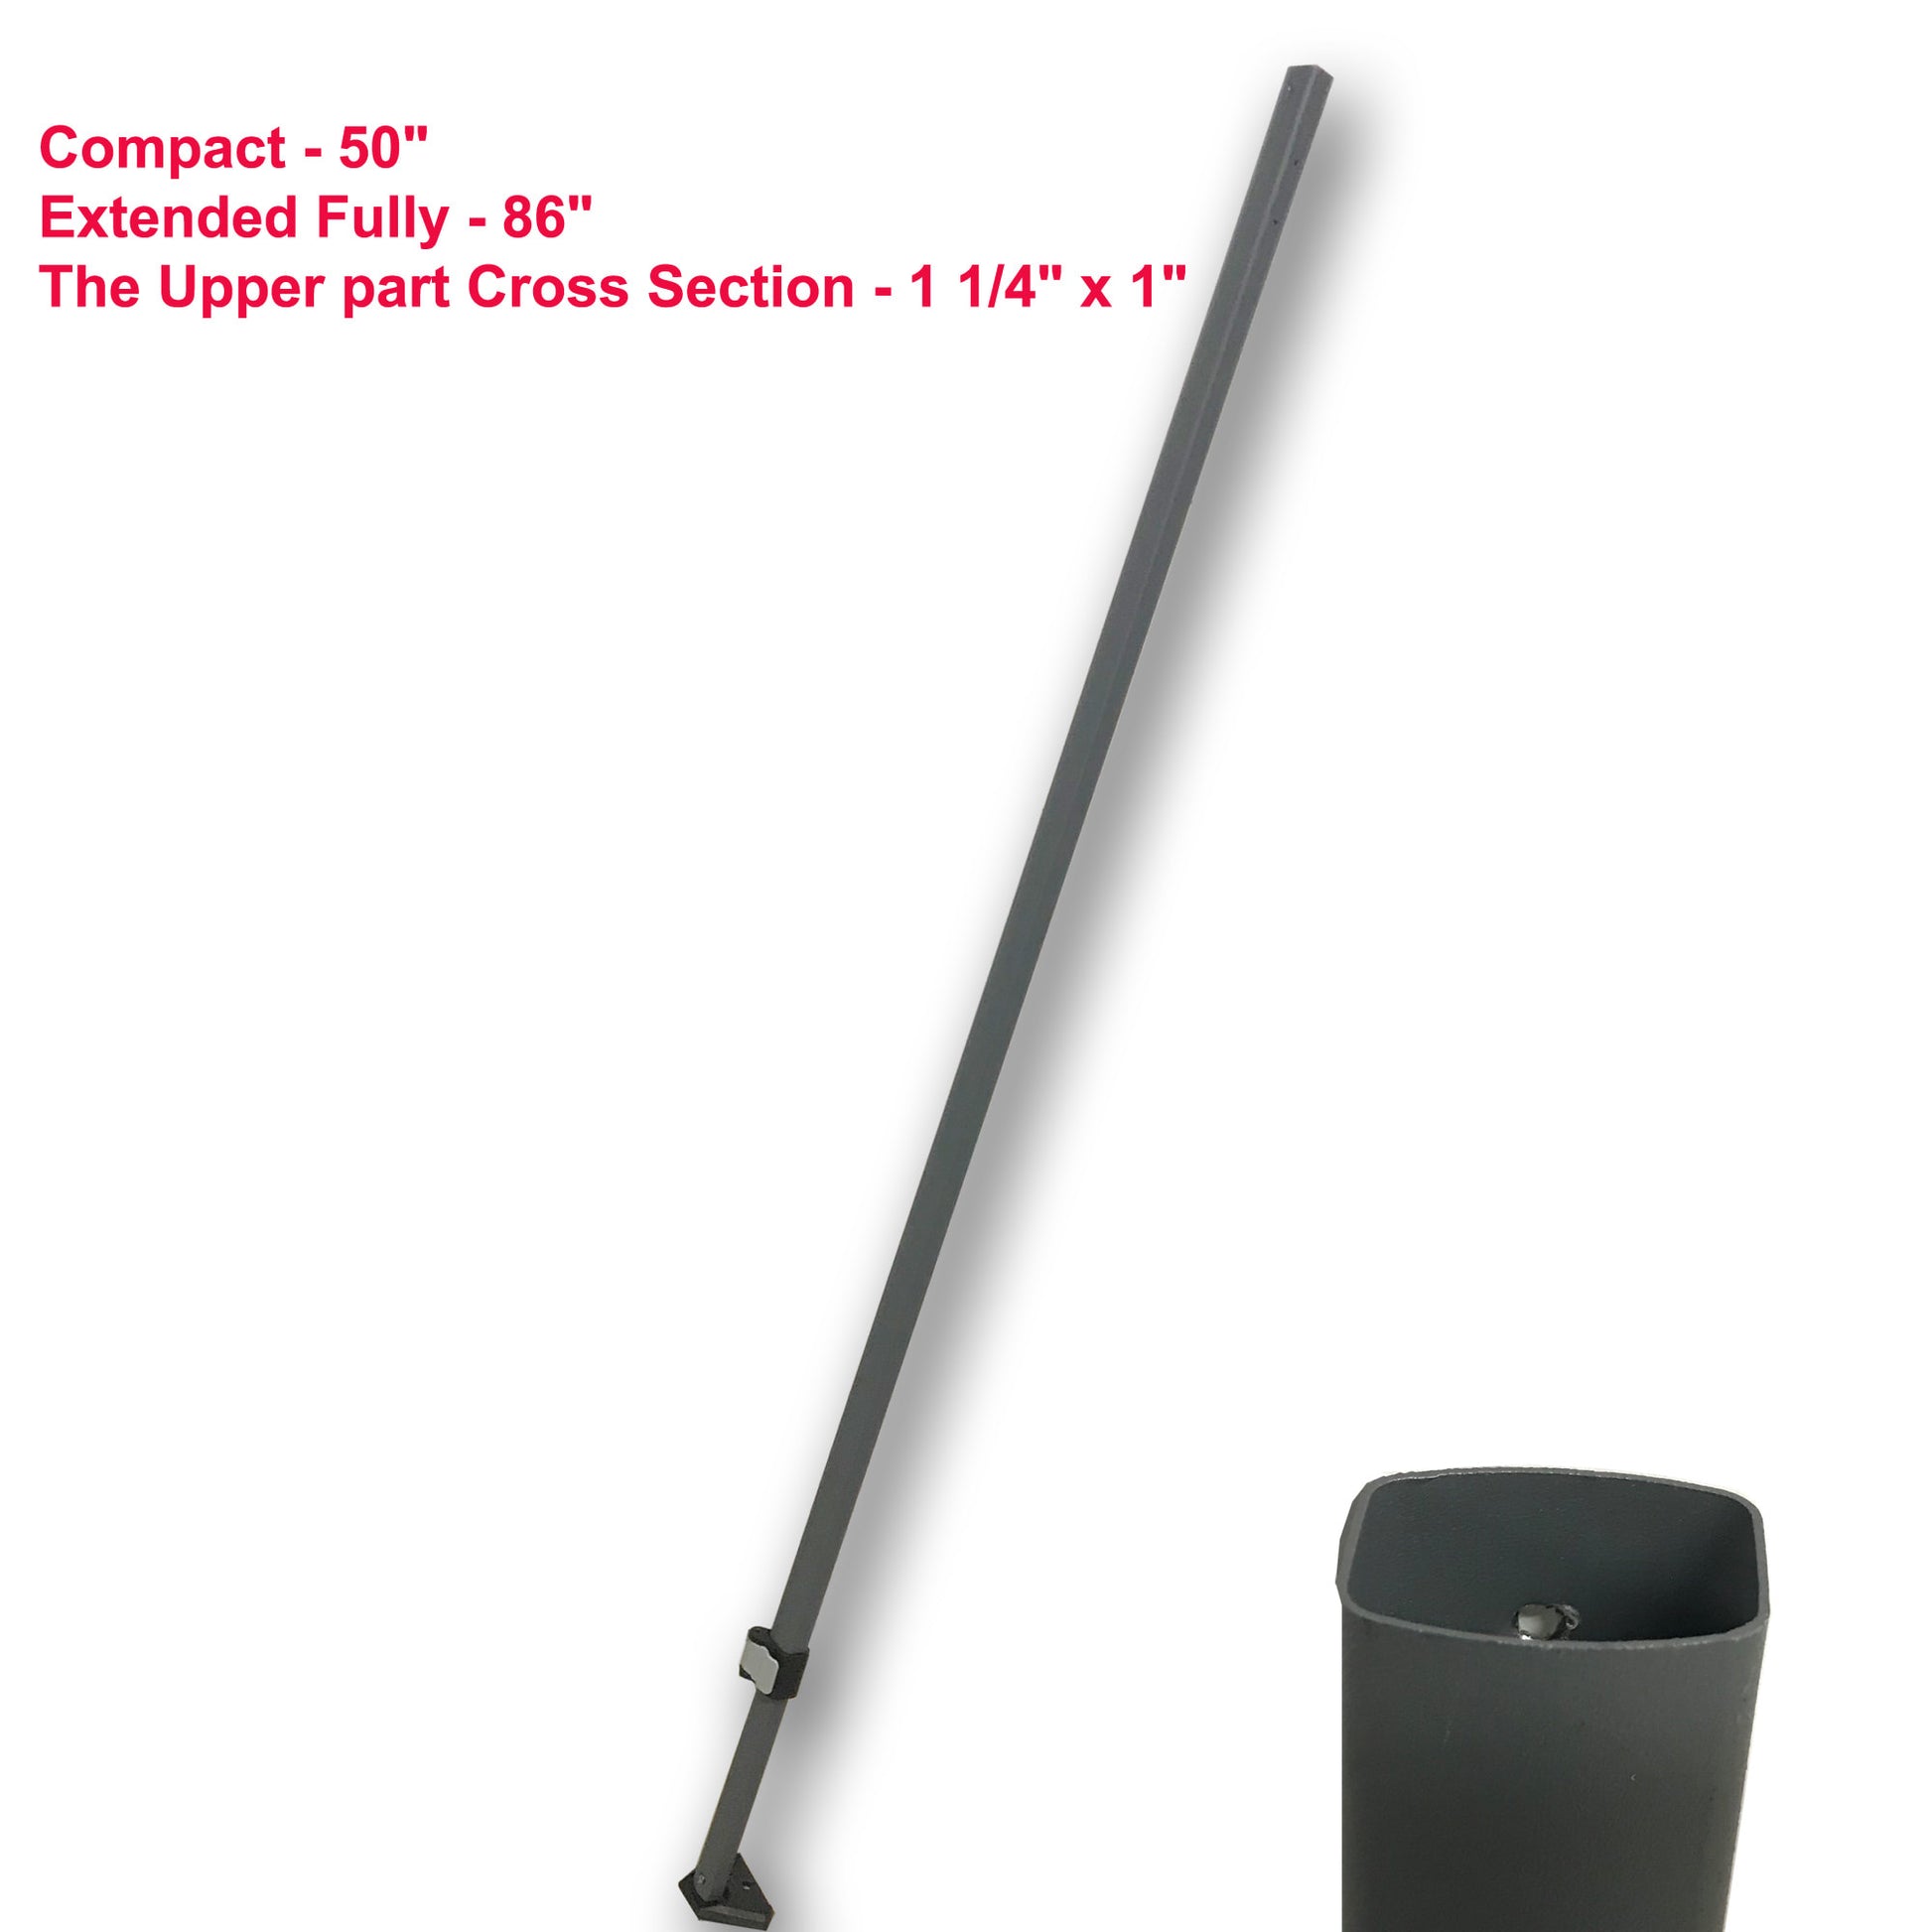 The image displays a black tent pole, likely made of metal, against a white background. Text accompanying the image provides dimensions: "Compact - 50", Extended Fully - 86", The Upper part Cross Section - 1 1/4" x 1"." The pole appears to have a mechanism for adjusting its length, indicated by the different measurements for 'compact' and 'extended fully'. At the bottom of the pole, there is a foot or base, probably for stability when the pole is upright.